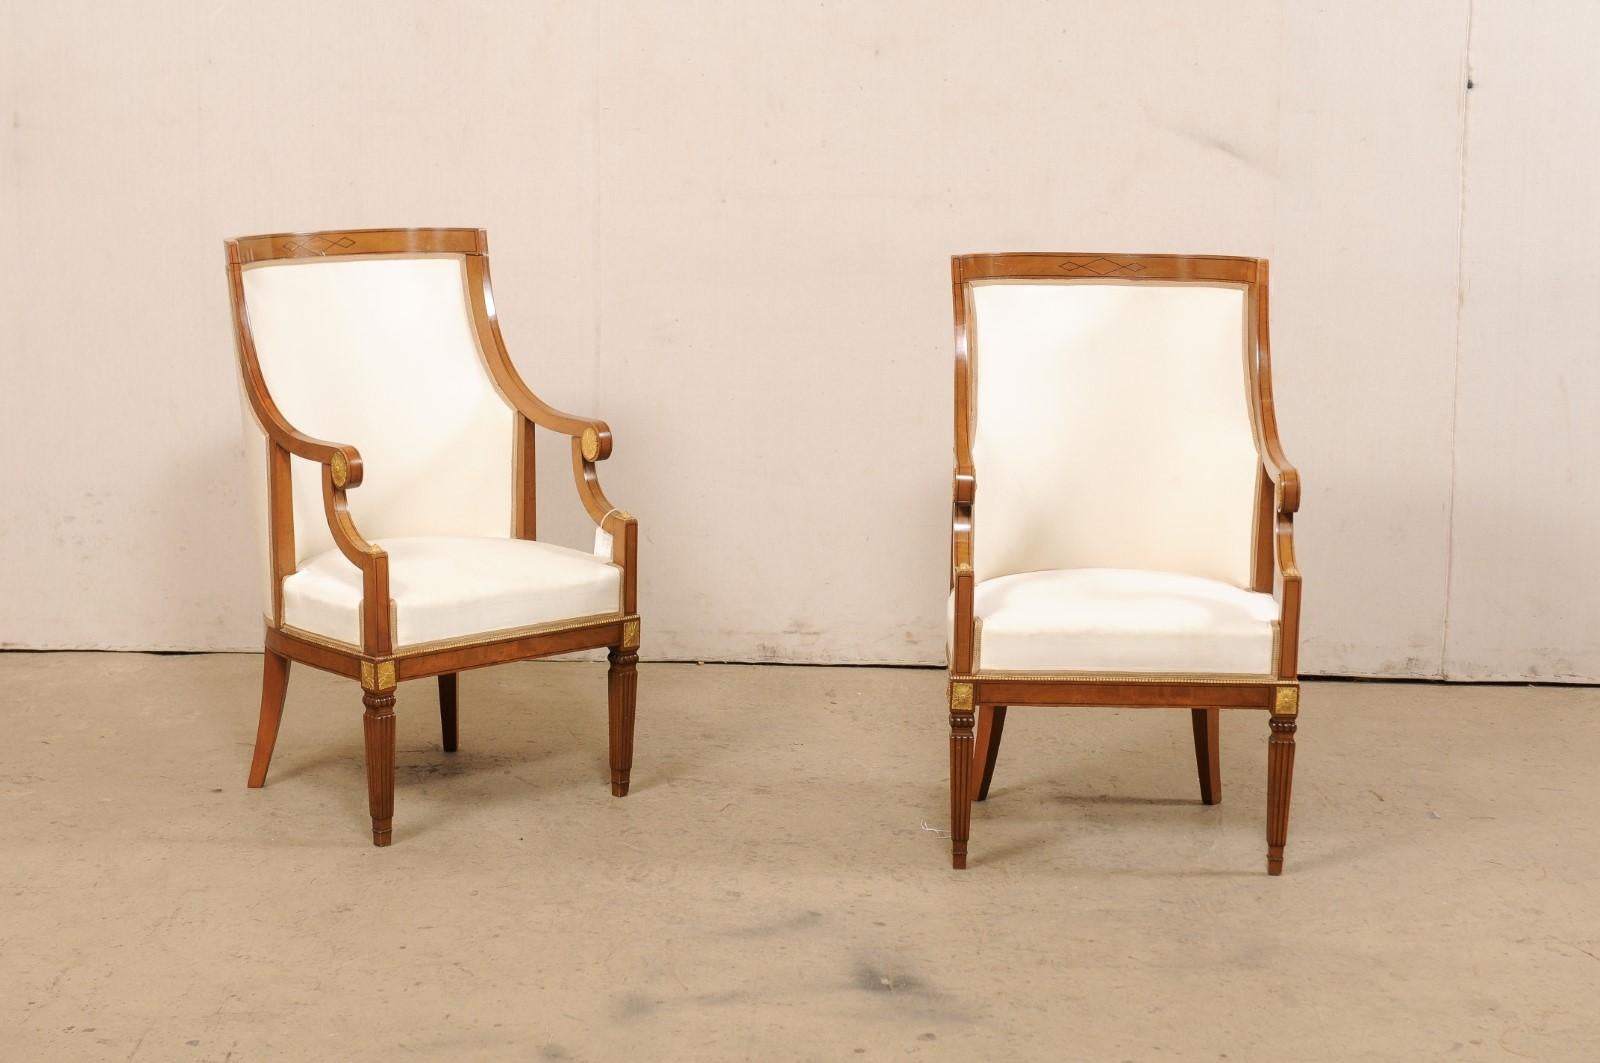 An Italian pair of carved wood armchairs, with upholstered back and seats, from the mid 20th century. This vintage pair of occasional chairs from Italy each have nicely rounded/barreled backs rest supports- upholstered and framed within a wooden